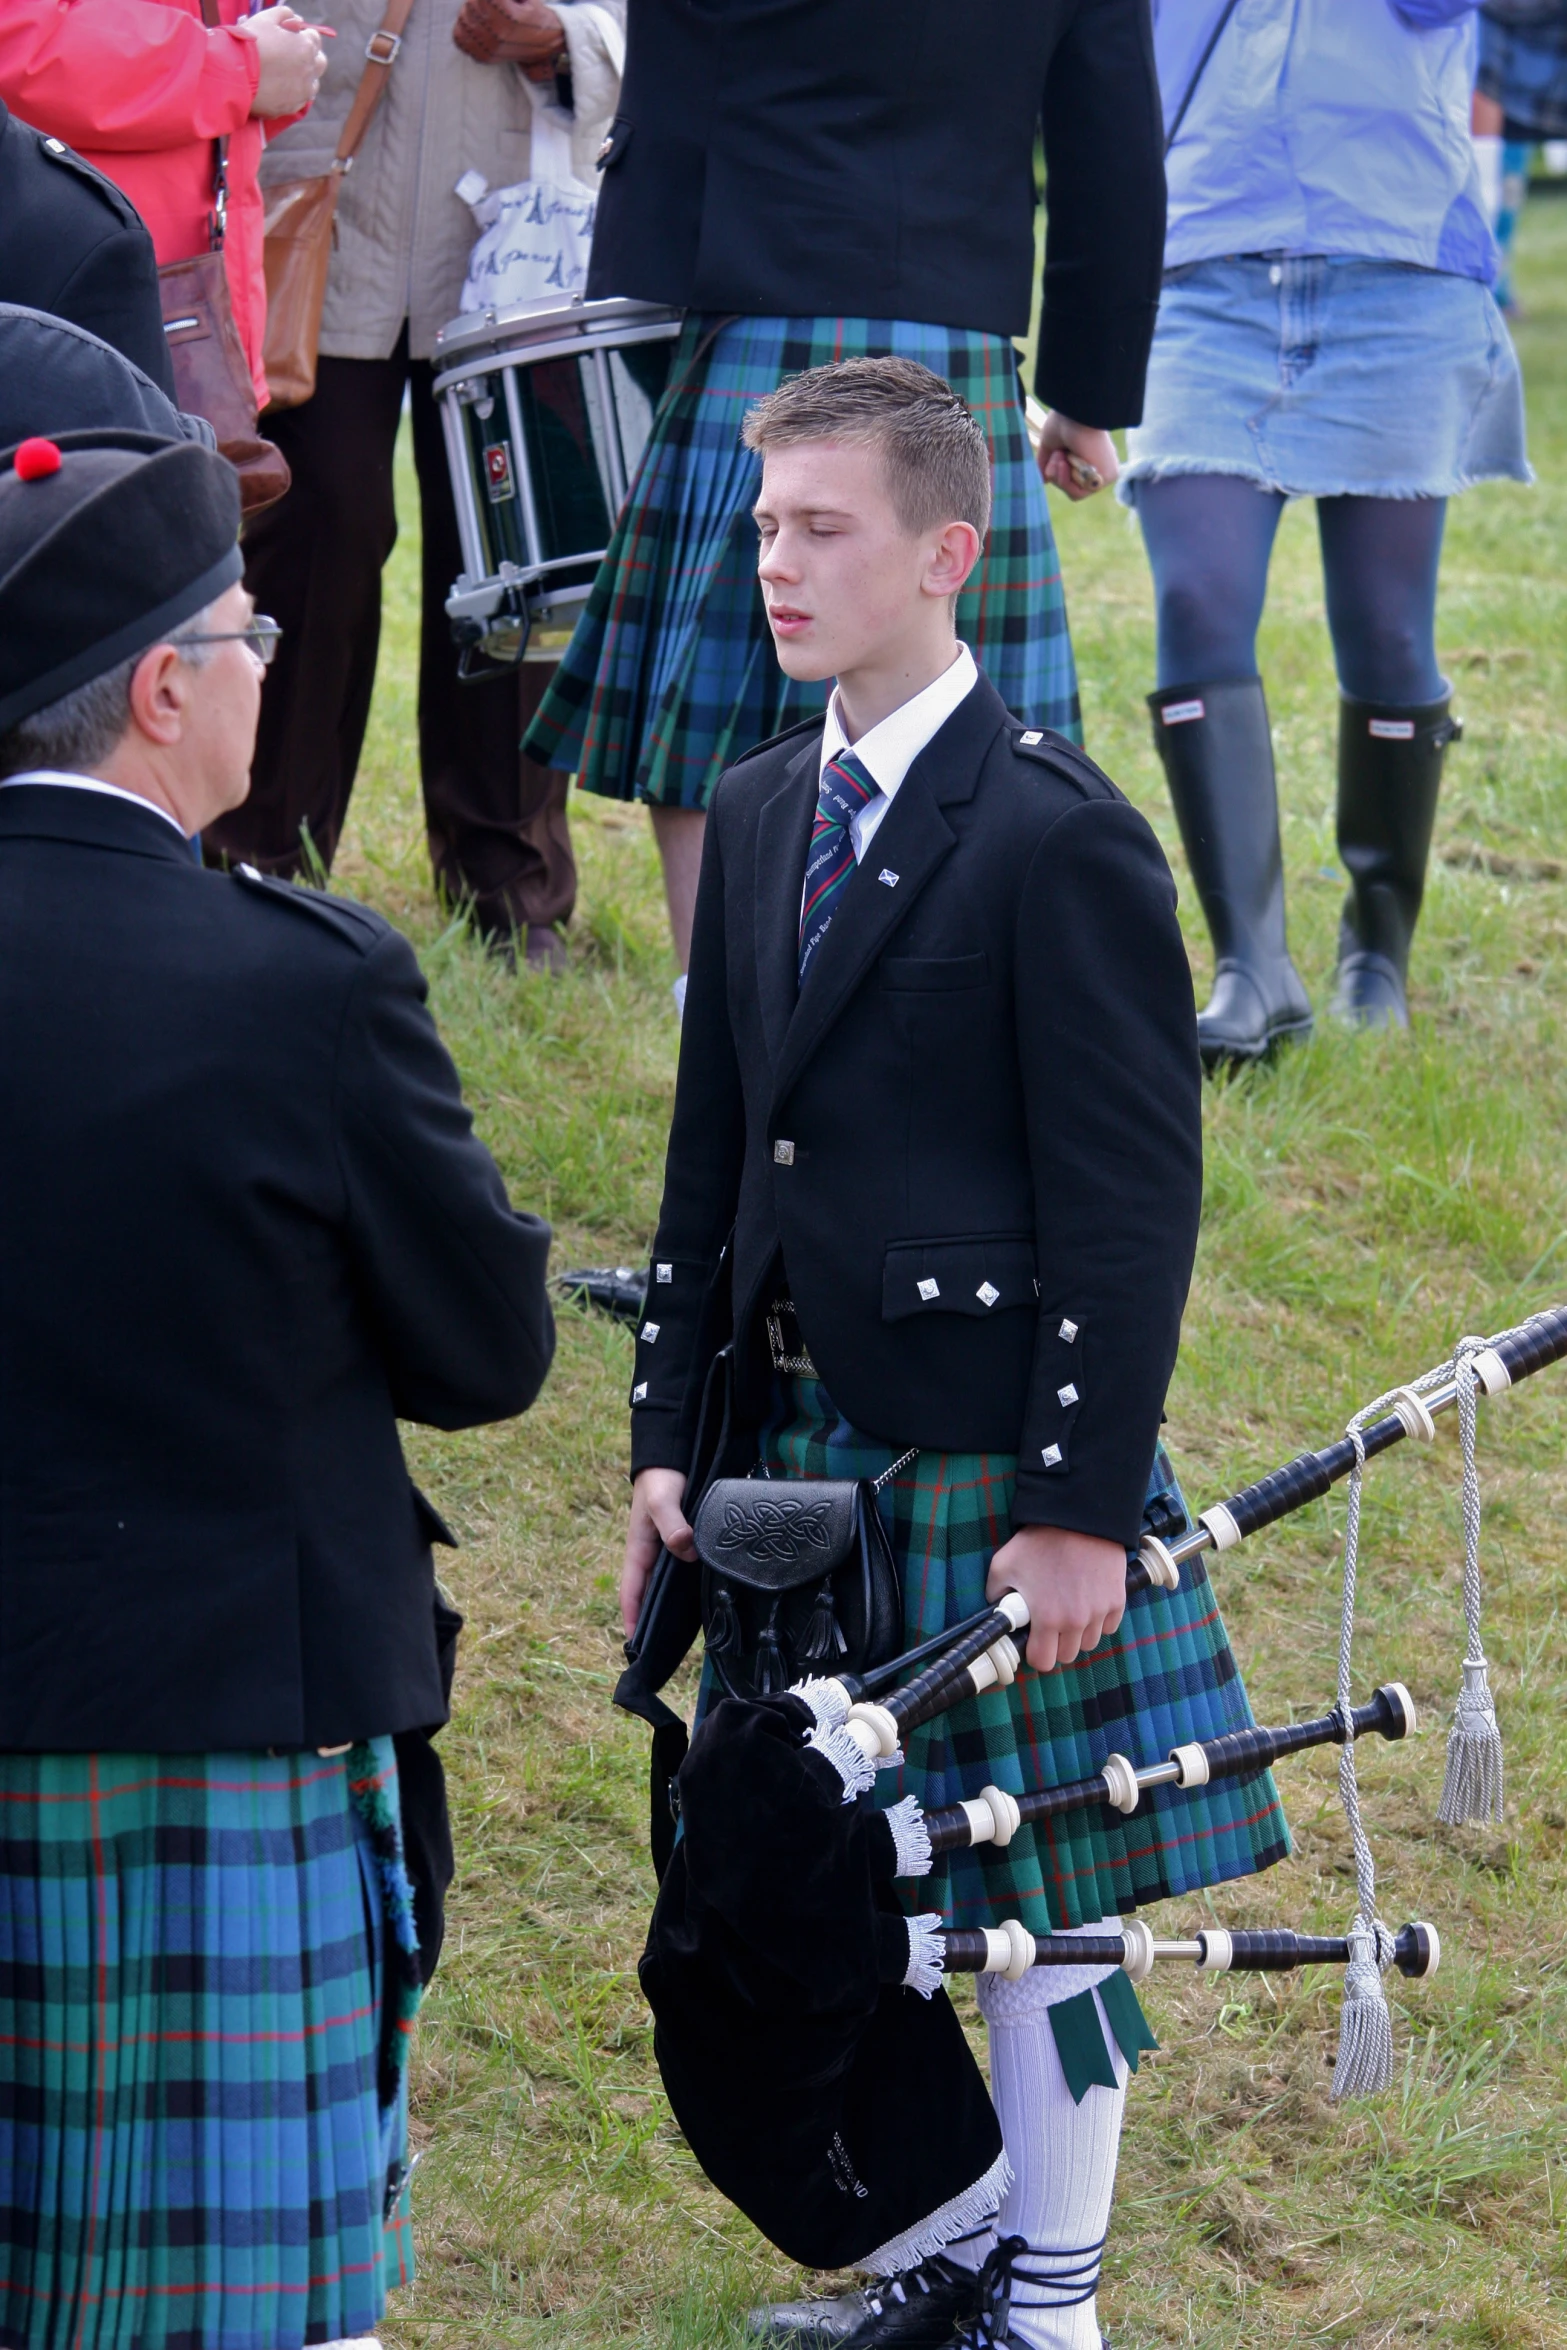 a man is playing a pipe band in the grass